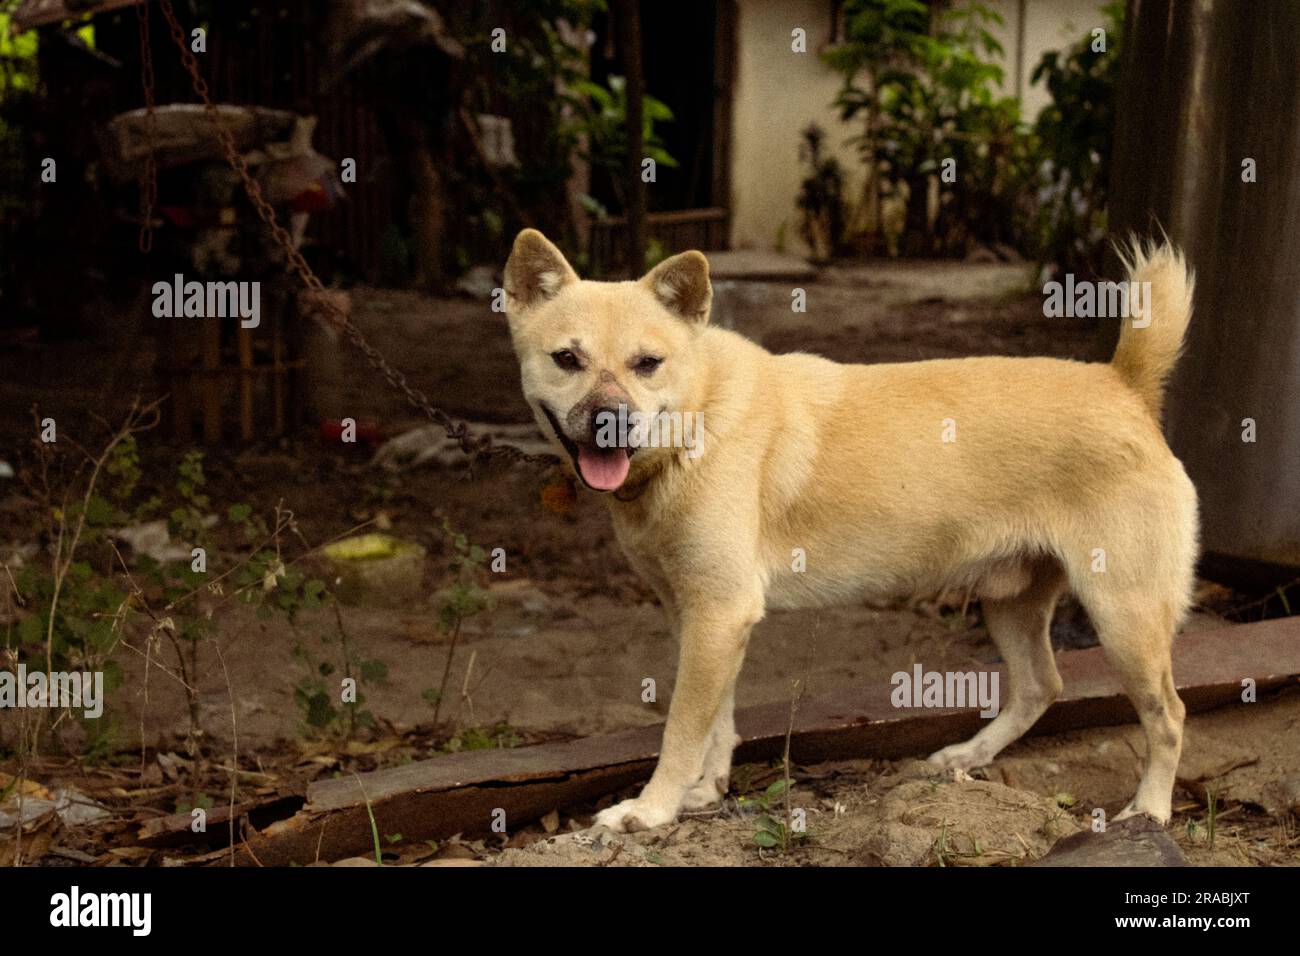 A dog in Iba, Zambales, Philippines Stock Photo